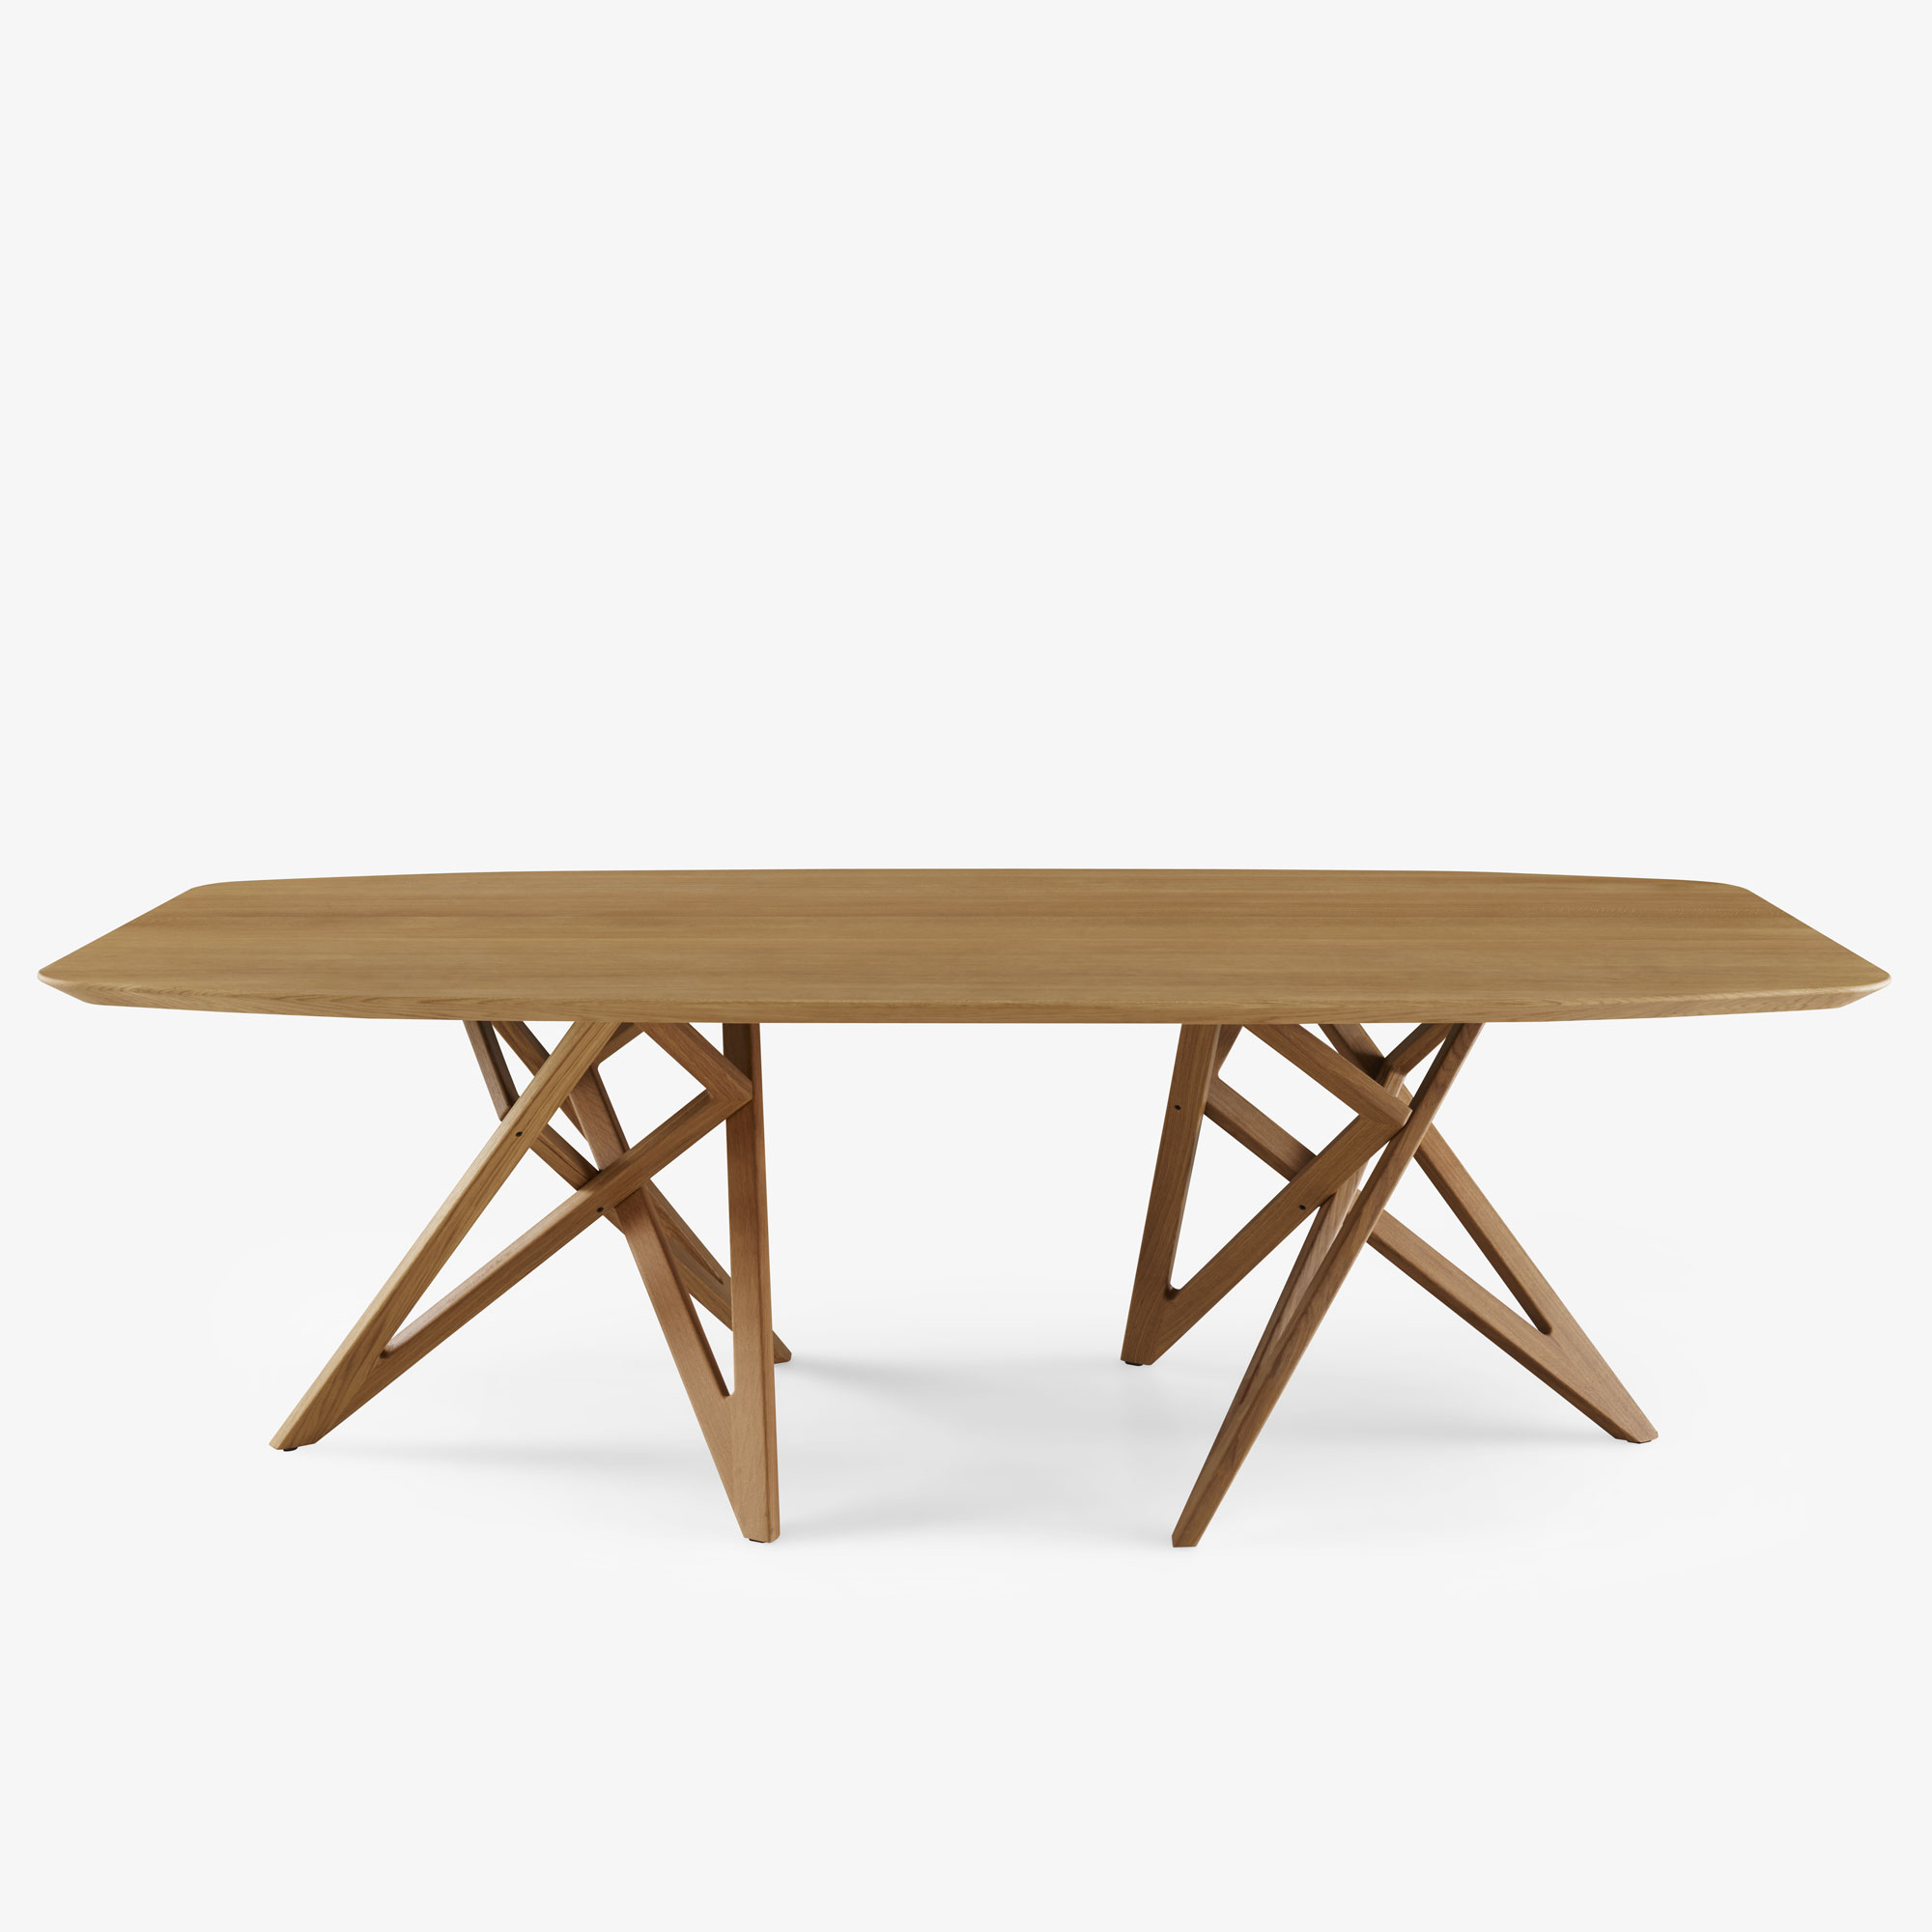 Image DINING TABLE – BARREL-SHAPED LEGS IN NATURAL OAK 